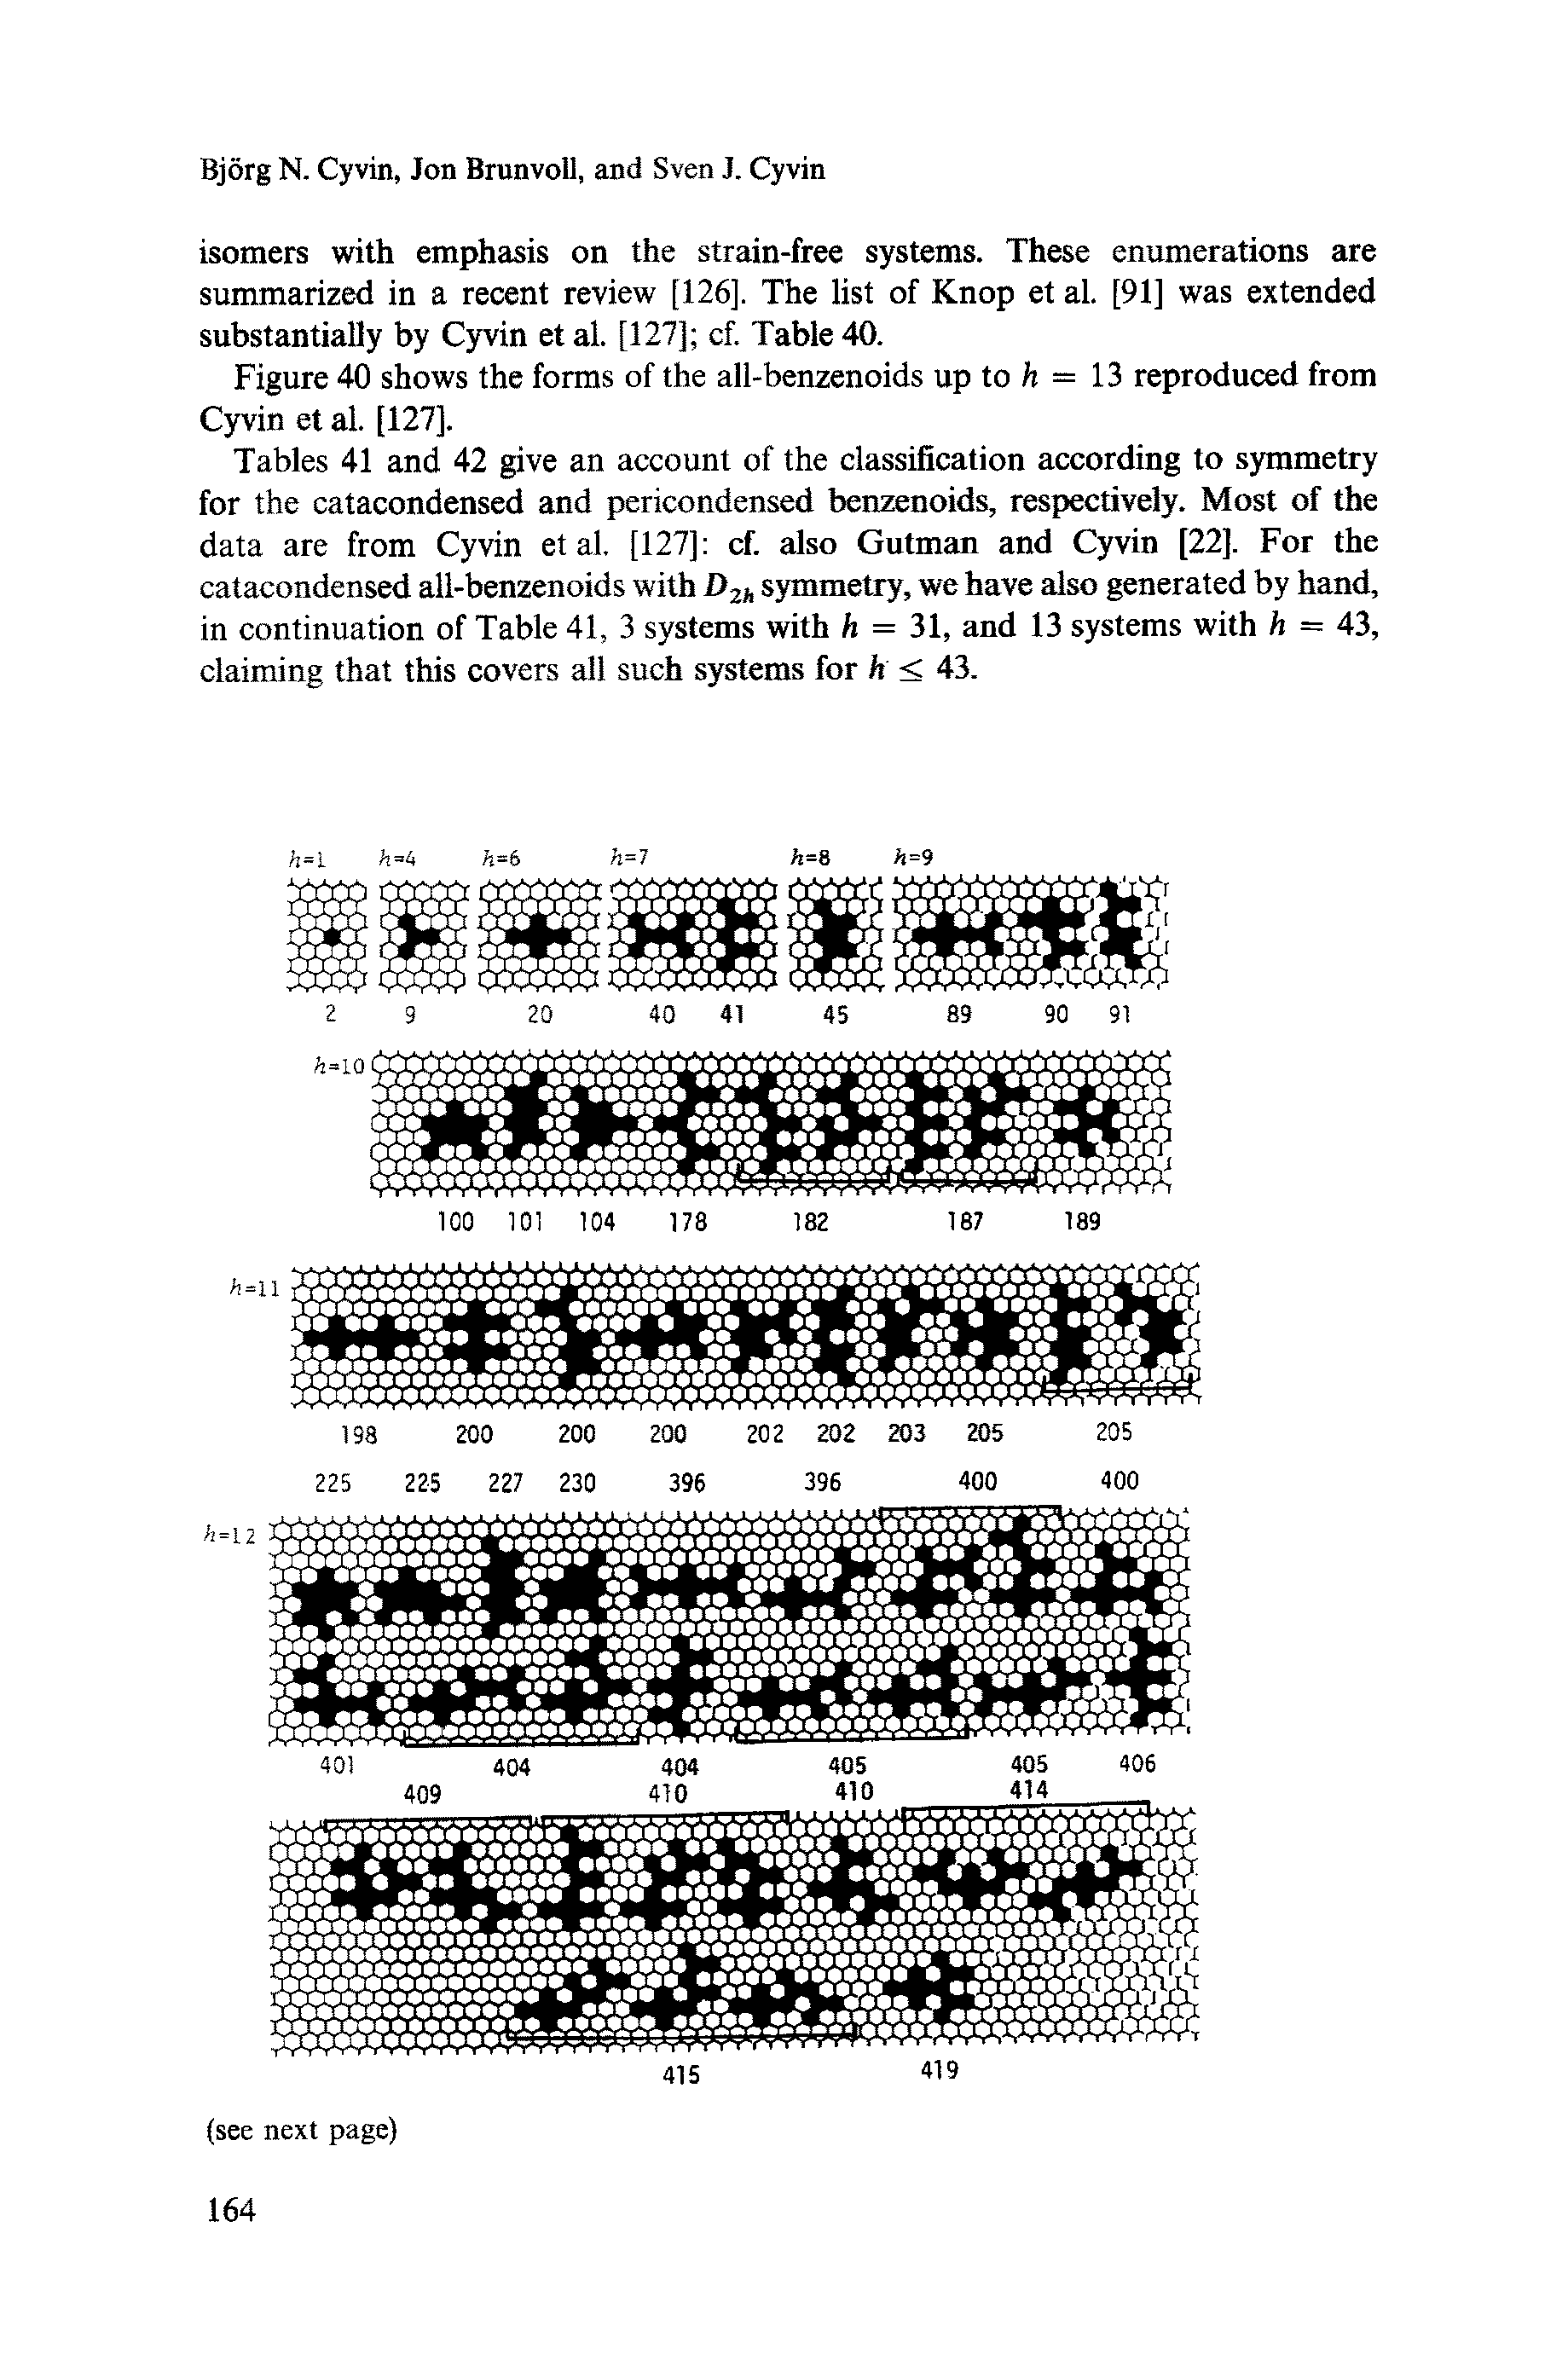 Tables 41 and 42 give an account of the classification according to symmetry for the catacondensed and pericondensed benzenoids, respectively. Most of the data are from Cyvin etal. [127] cf. also Gutman and Cyvin [22], For the catacondensed all-benzenoids with D2h symmetry, we have also generated by hand, in continuation of Table 41, 3 systems with h = 31, and 13 systems with h = 43, claiming that this covers all such systems for h < 43.